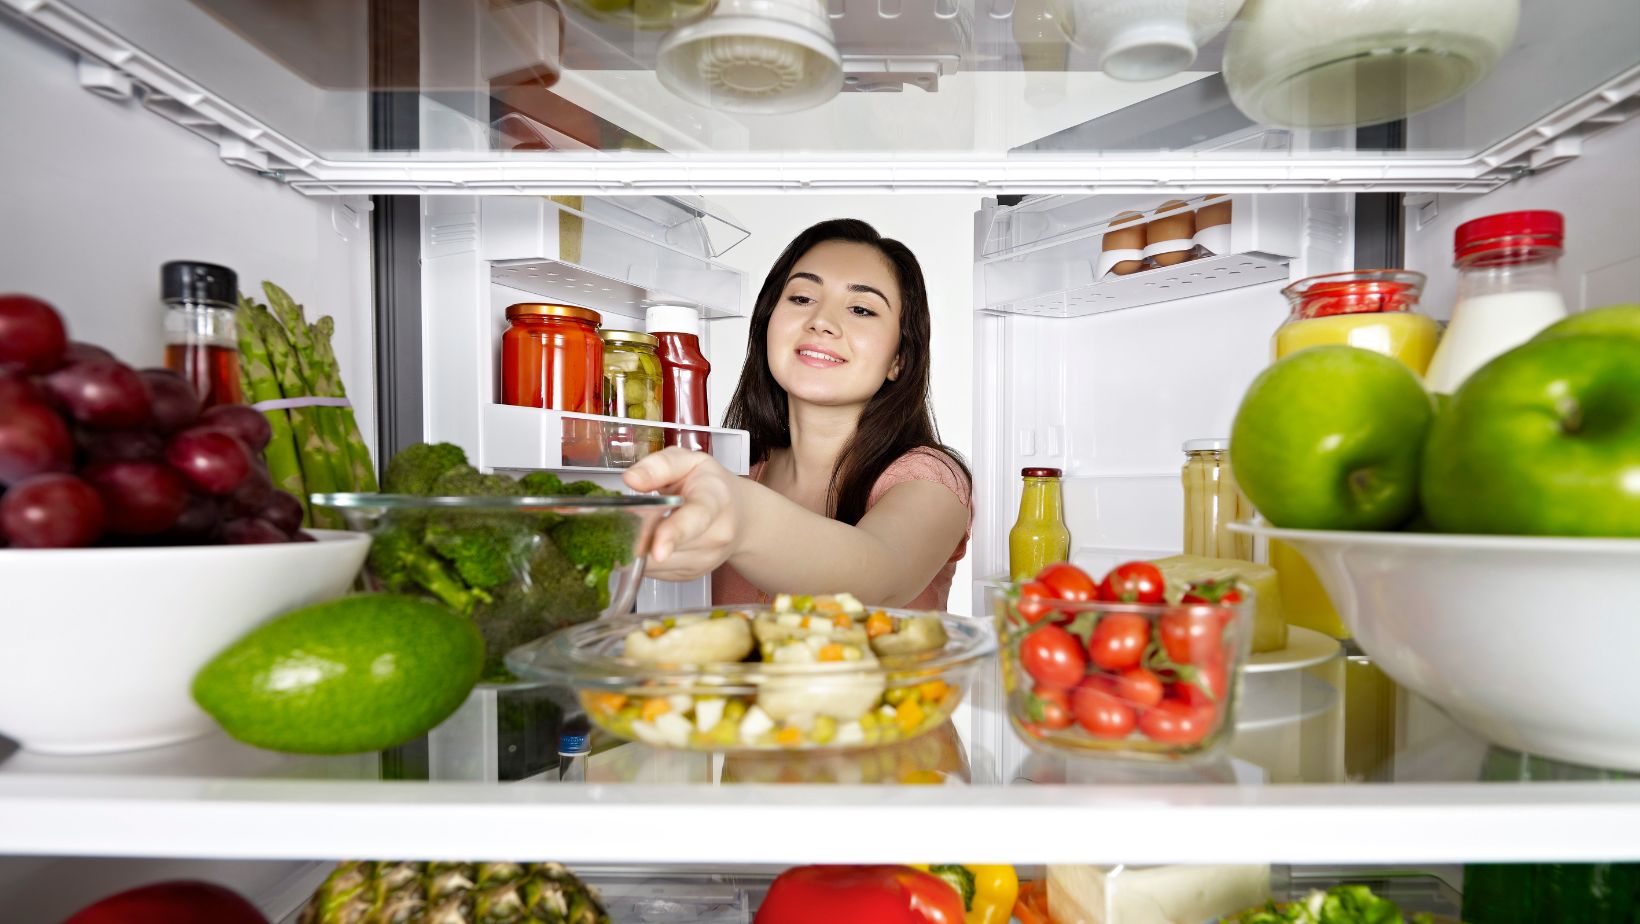 woman reaching into the interior of a refrigerator. different fridge organization methods are on display including clear organizing bins that hold produce